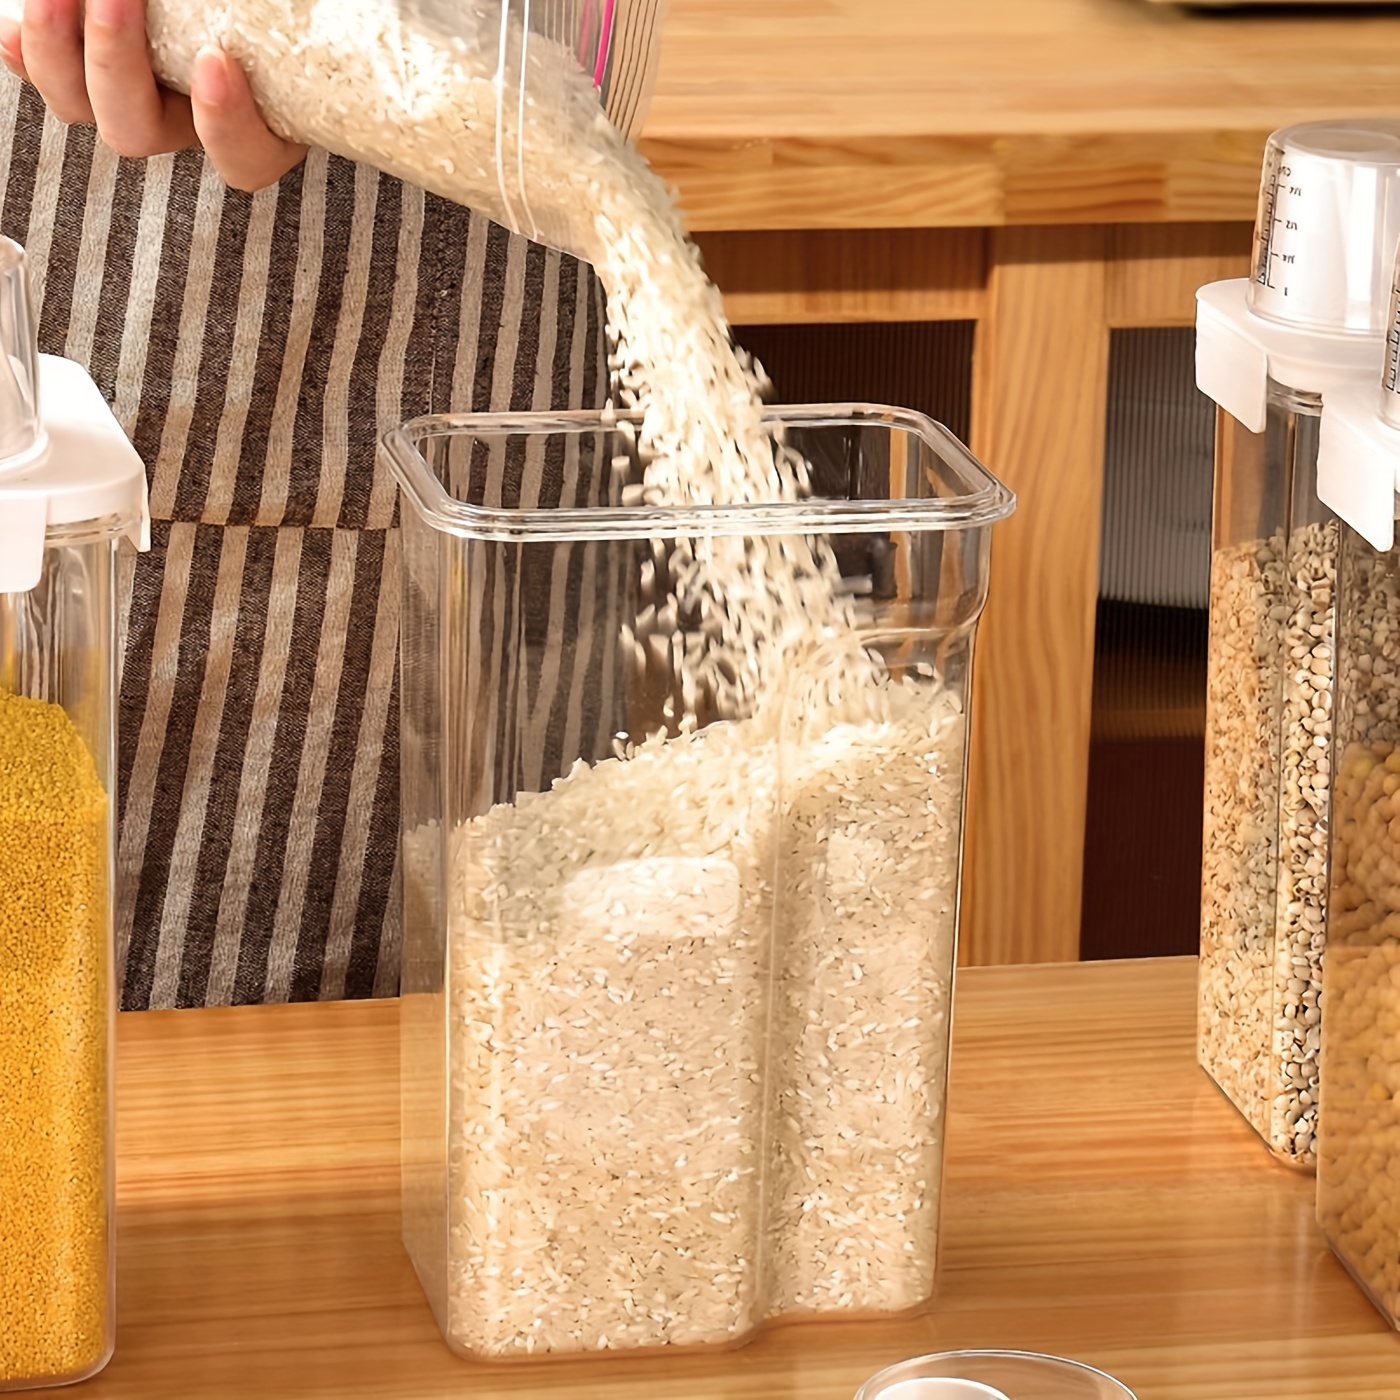 Cereal Container, Plastic Food Dispenser For Grain Cereal Flour